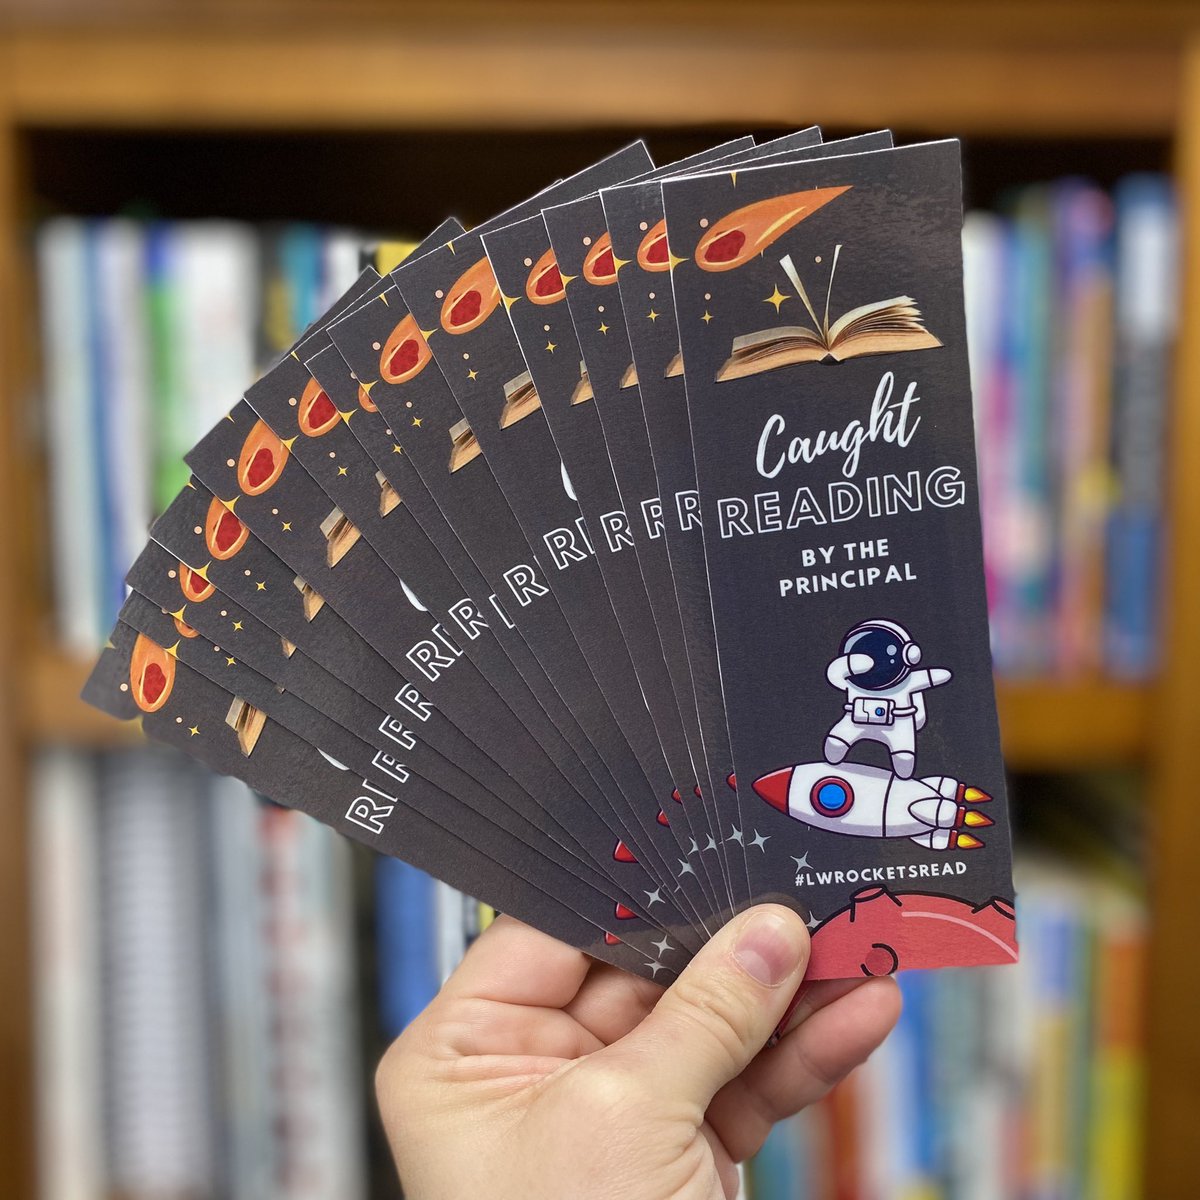 During arrival this morning I caught two students in a reading emergency and it gave me an idea to create these bookmarks! @canva is seriously one of my favorite tools! #LWRocketsRead #LWRockets #momsasprincipals #iledchat #principalsinaction